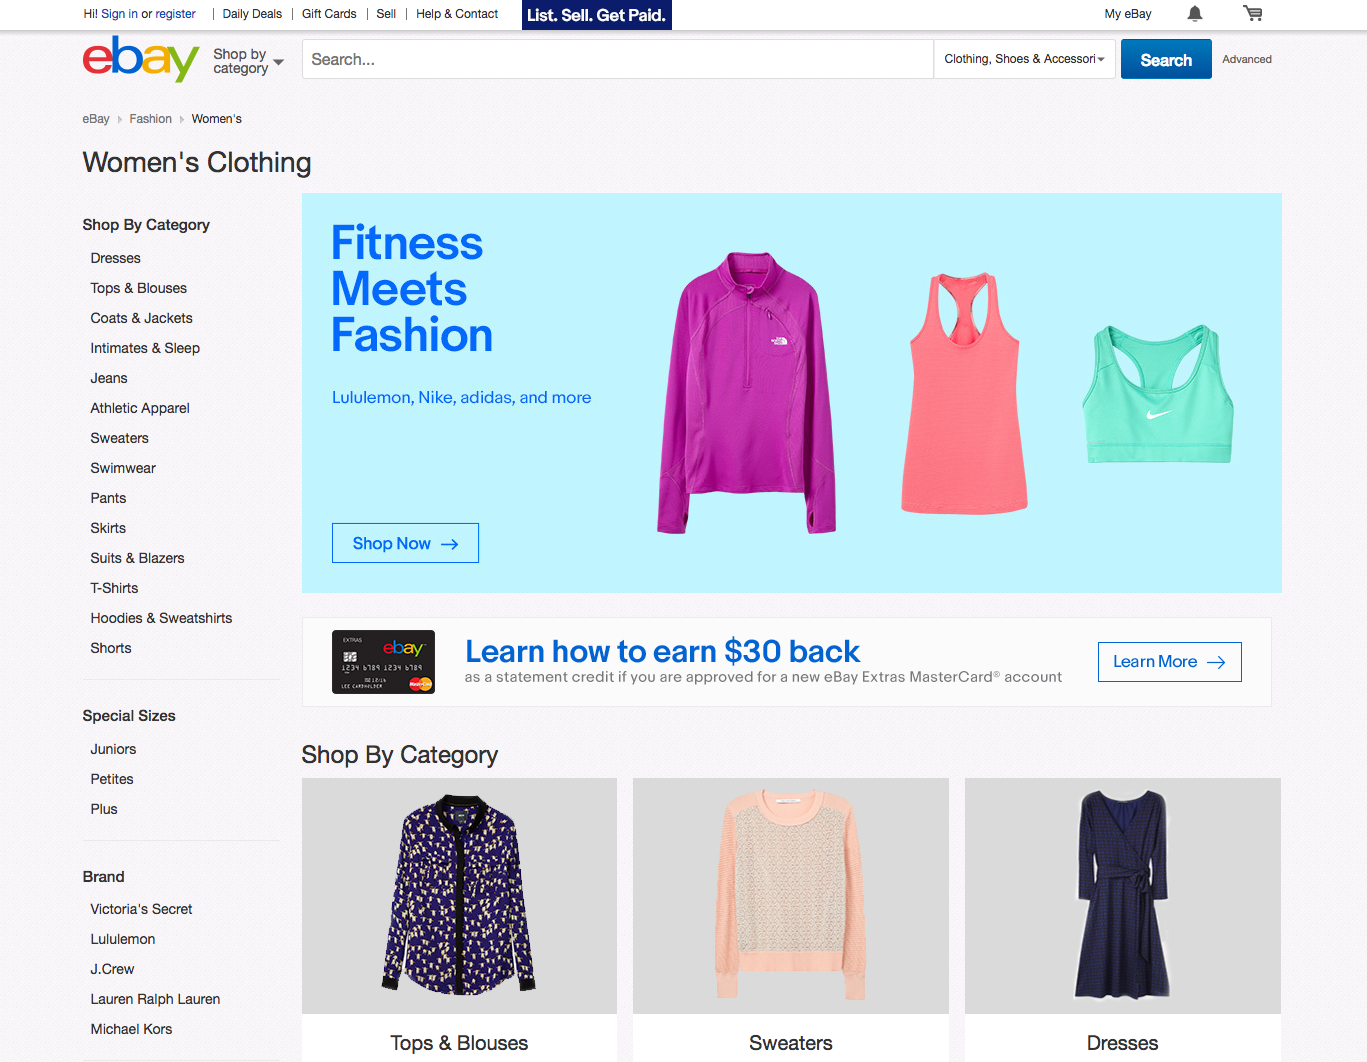 The Best Places To Buy Used Clothing Online